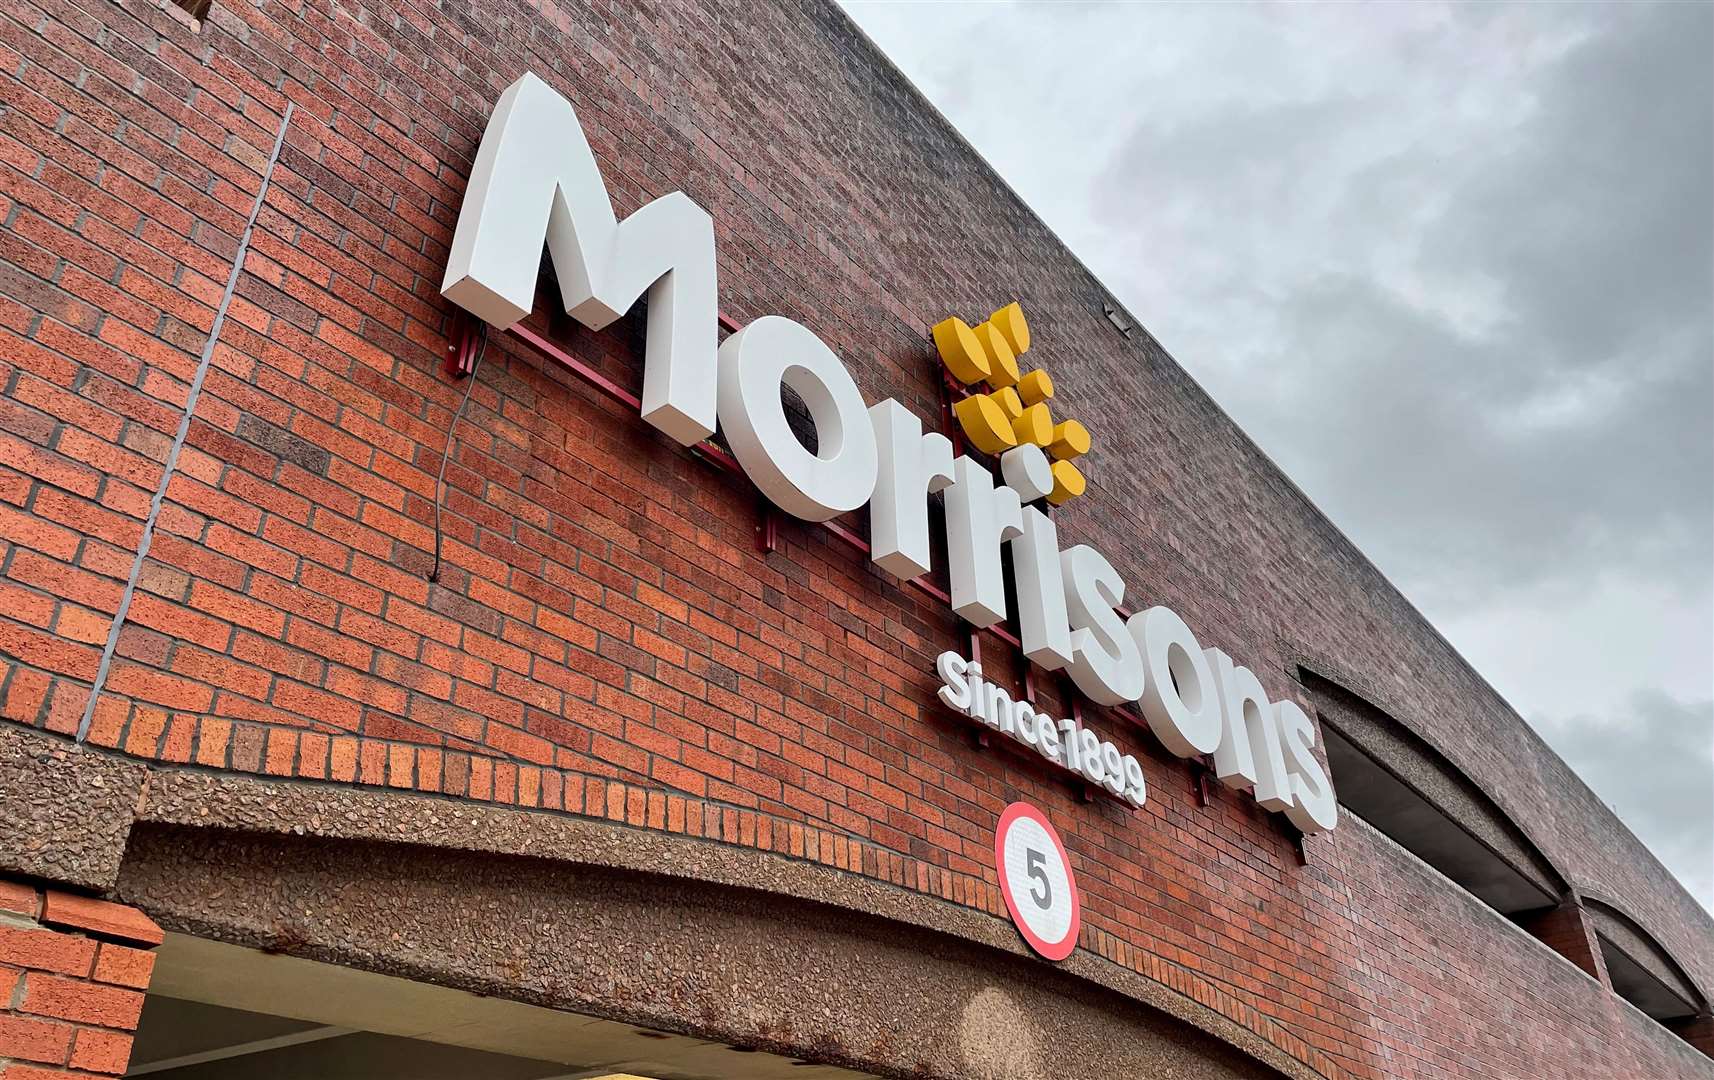 Morrisons is said to be trialling a return of its More card